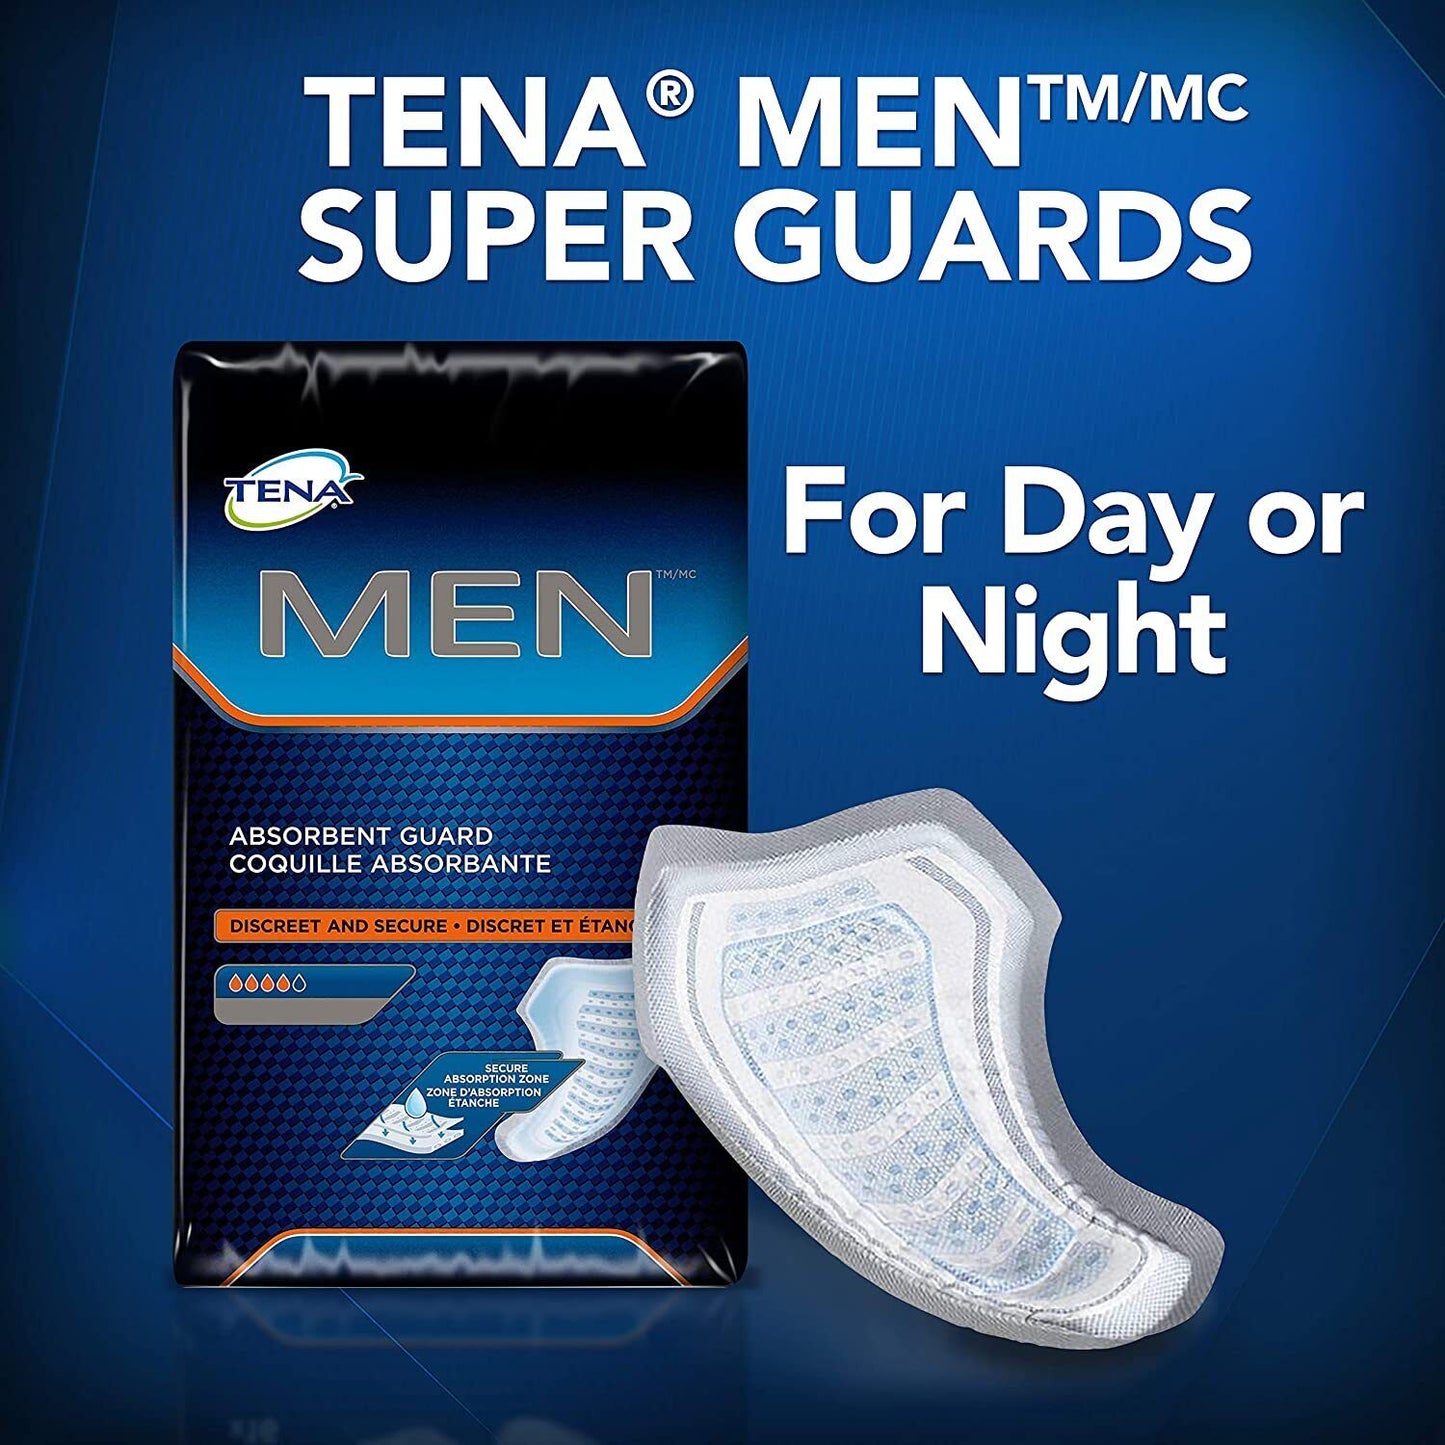 TENA Incontinence Guards for Men, Super Absorbency, 96 Count (6 Packs of 16)